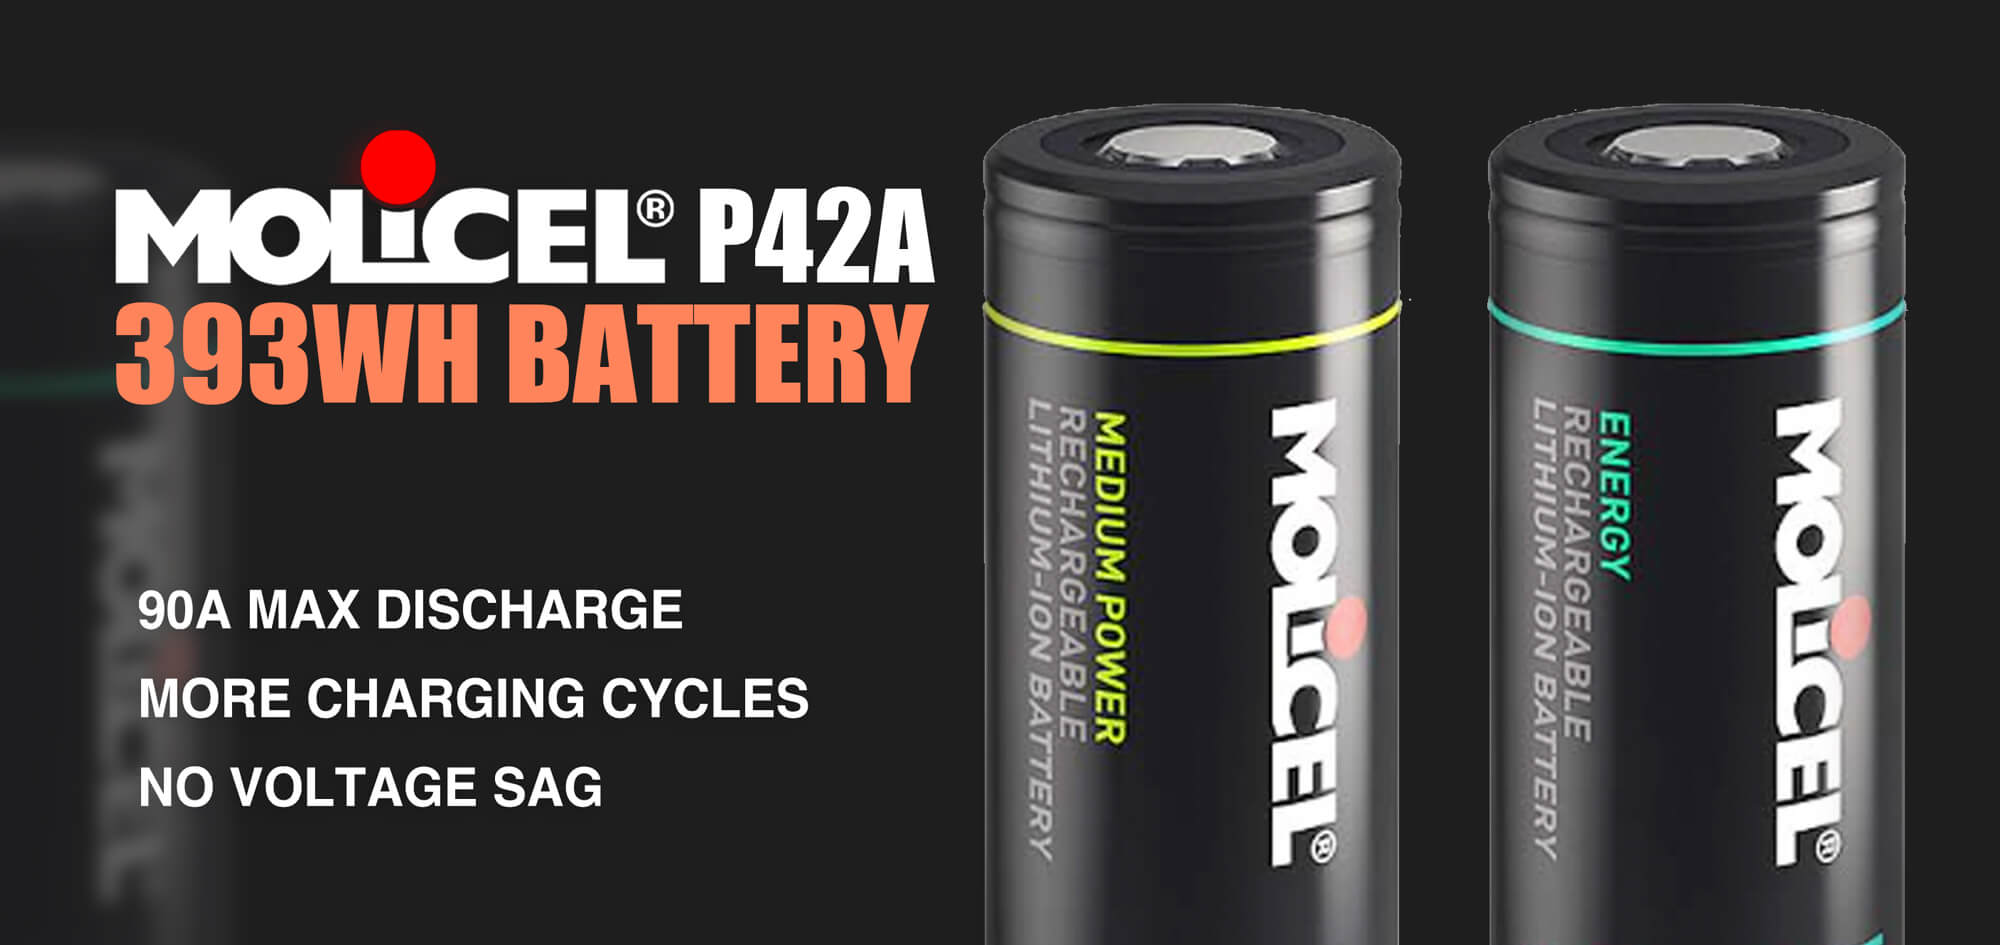 Tynee mini 3 electric skateboard molicel P42A 393Wh battery